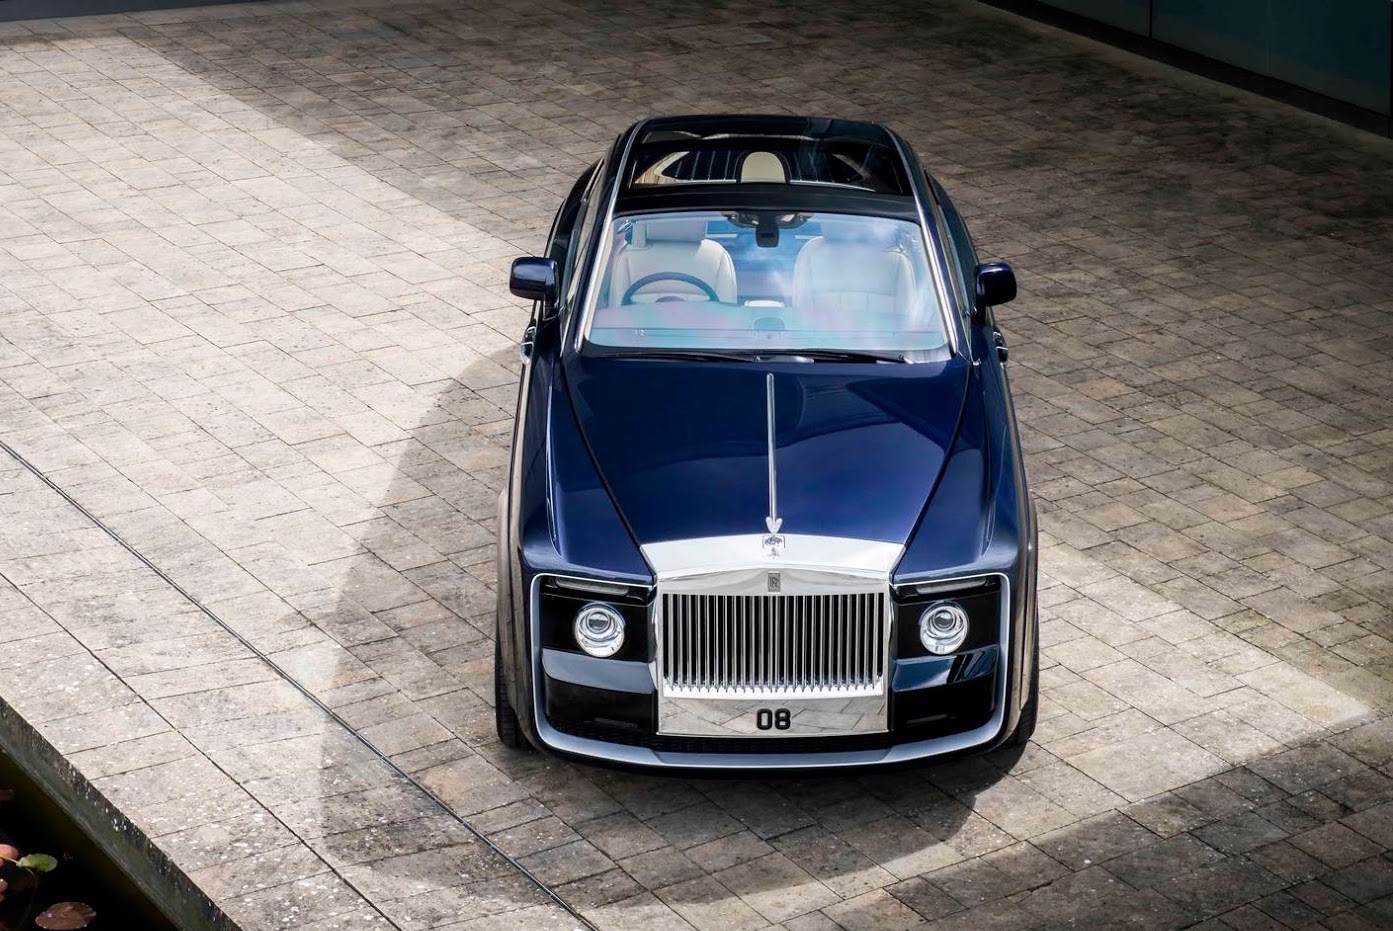 Rolls-Royce Sweptail is revealed and it is priced at QR 48 million